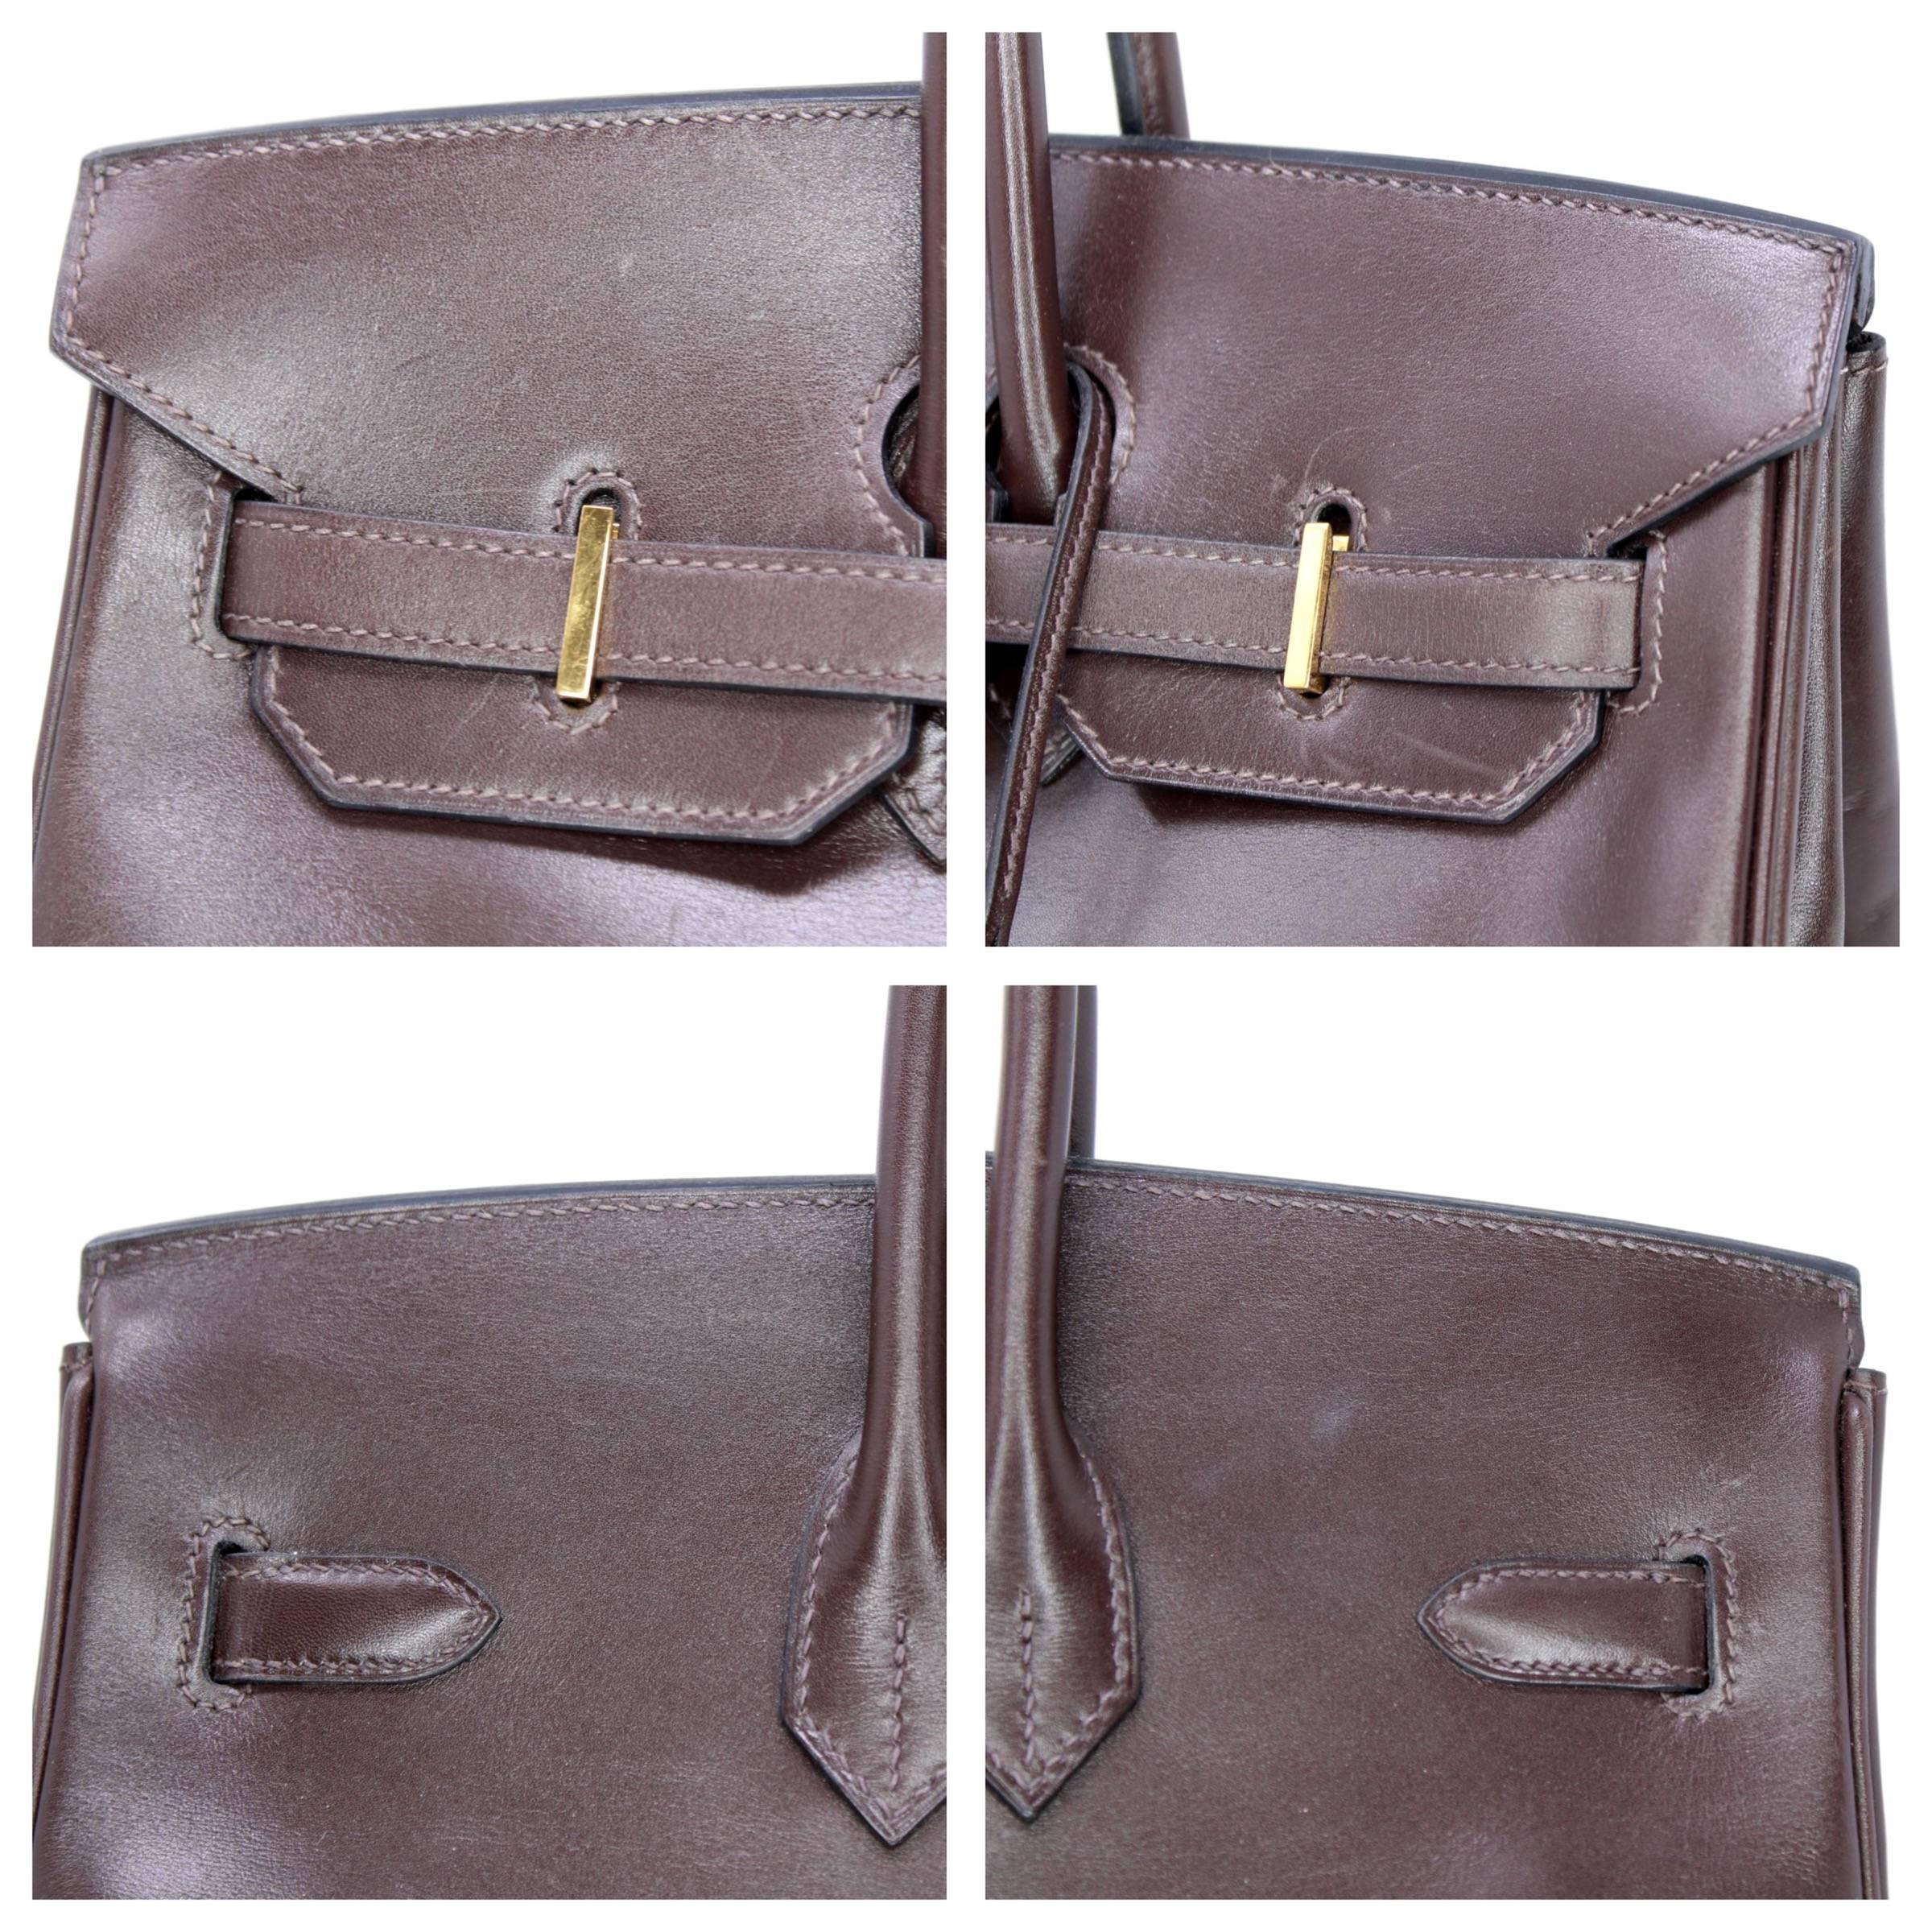 Gray Hermes Birkin 35cm Chocolate Brown Smooth Leather For Sale